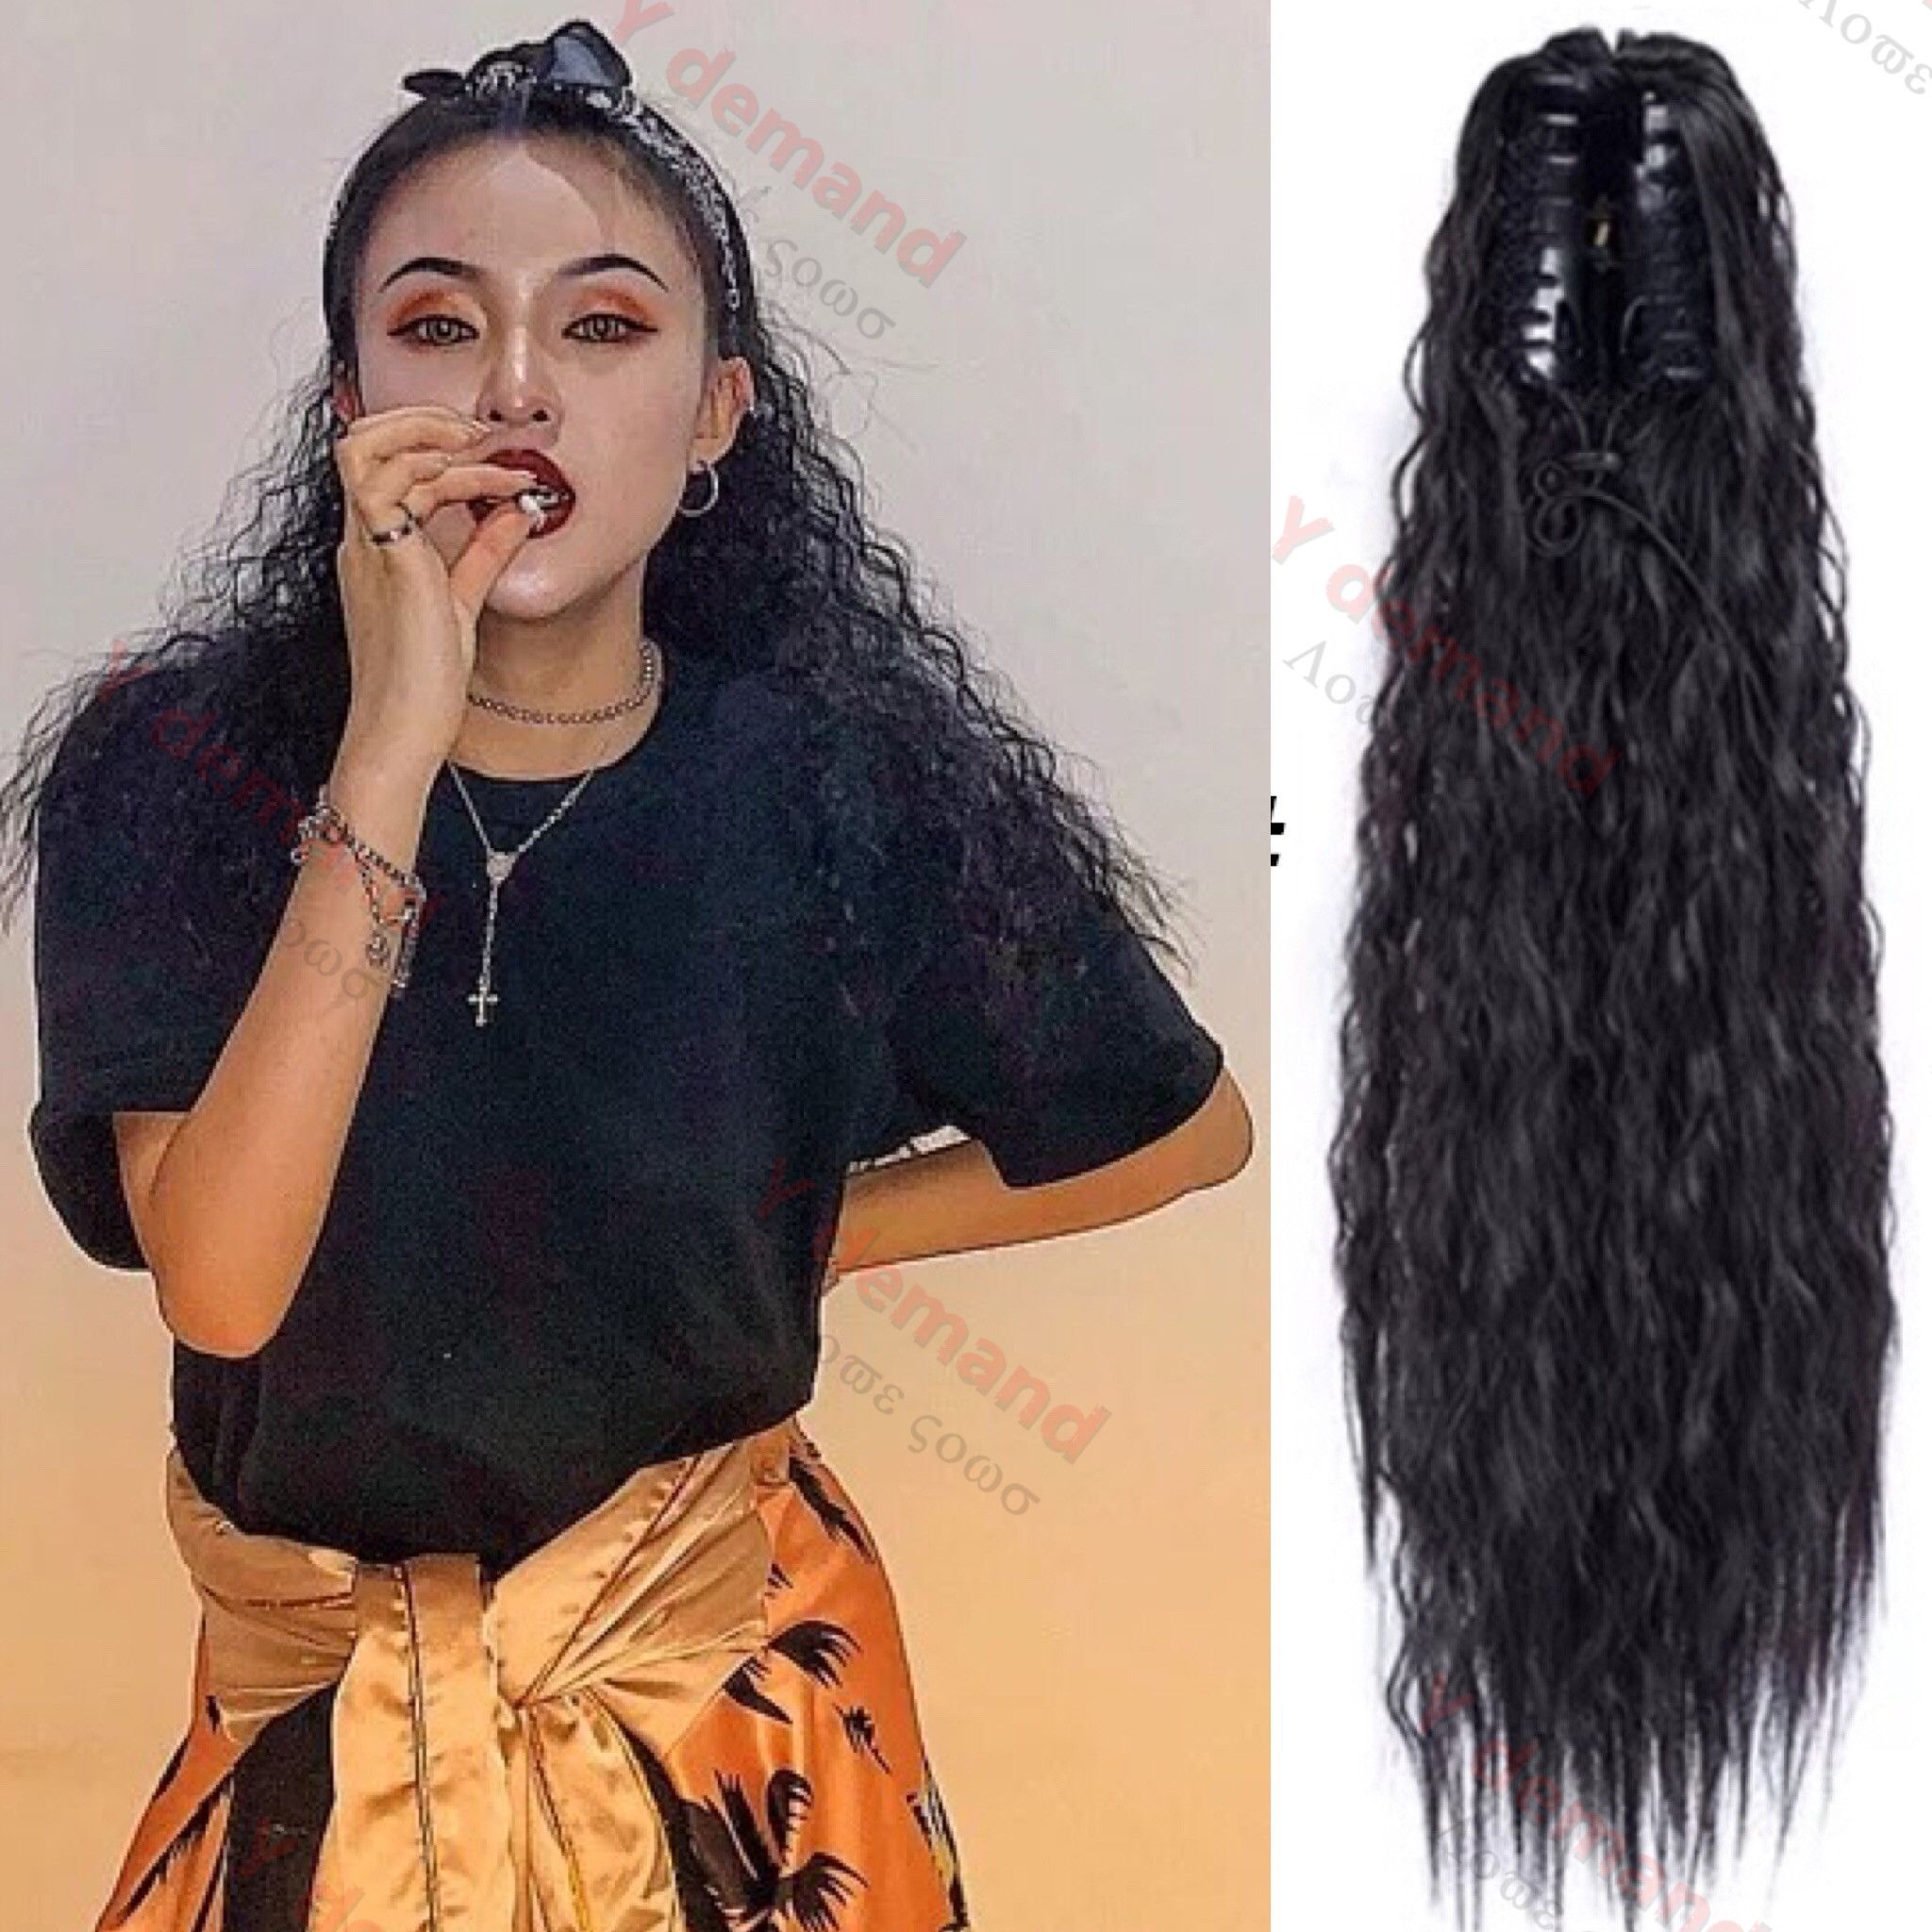 Y Demand Long Wavy Curly Hair Ponytail For Black Women Synthetic Ponytail Pony Tail Heat Resistant Fake Hair Pieces Hairpiece Ponytail Blonde Hair Ponytail From Y Demand 6 44 Dhgate Com